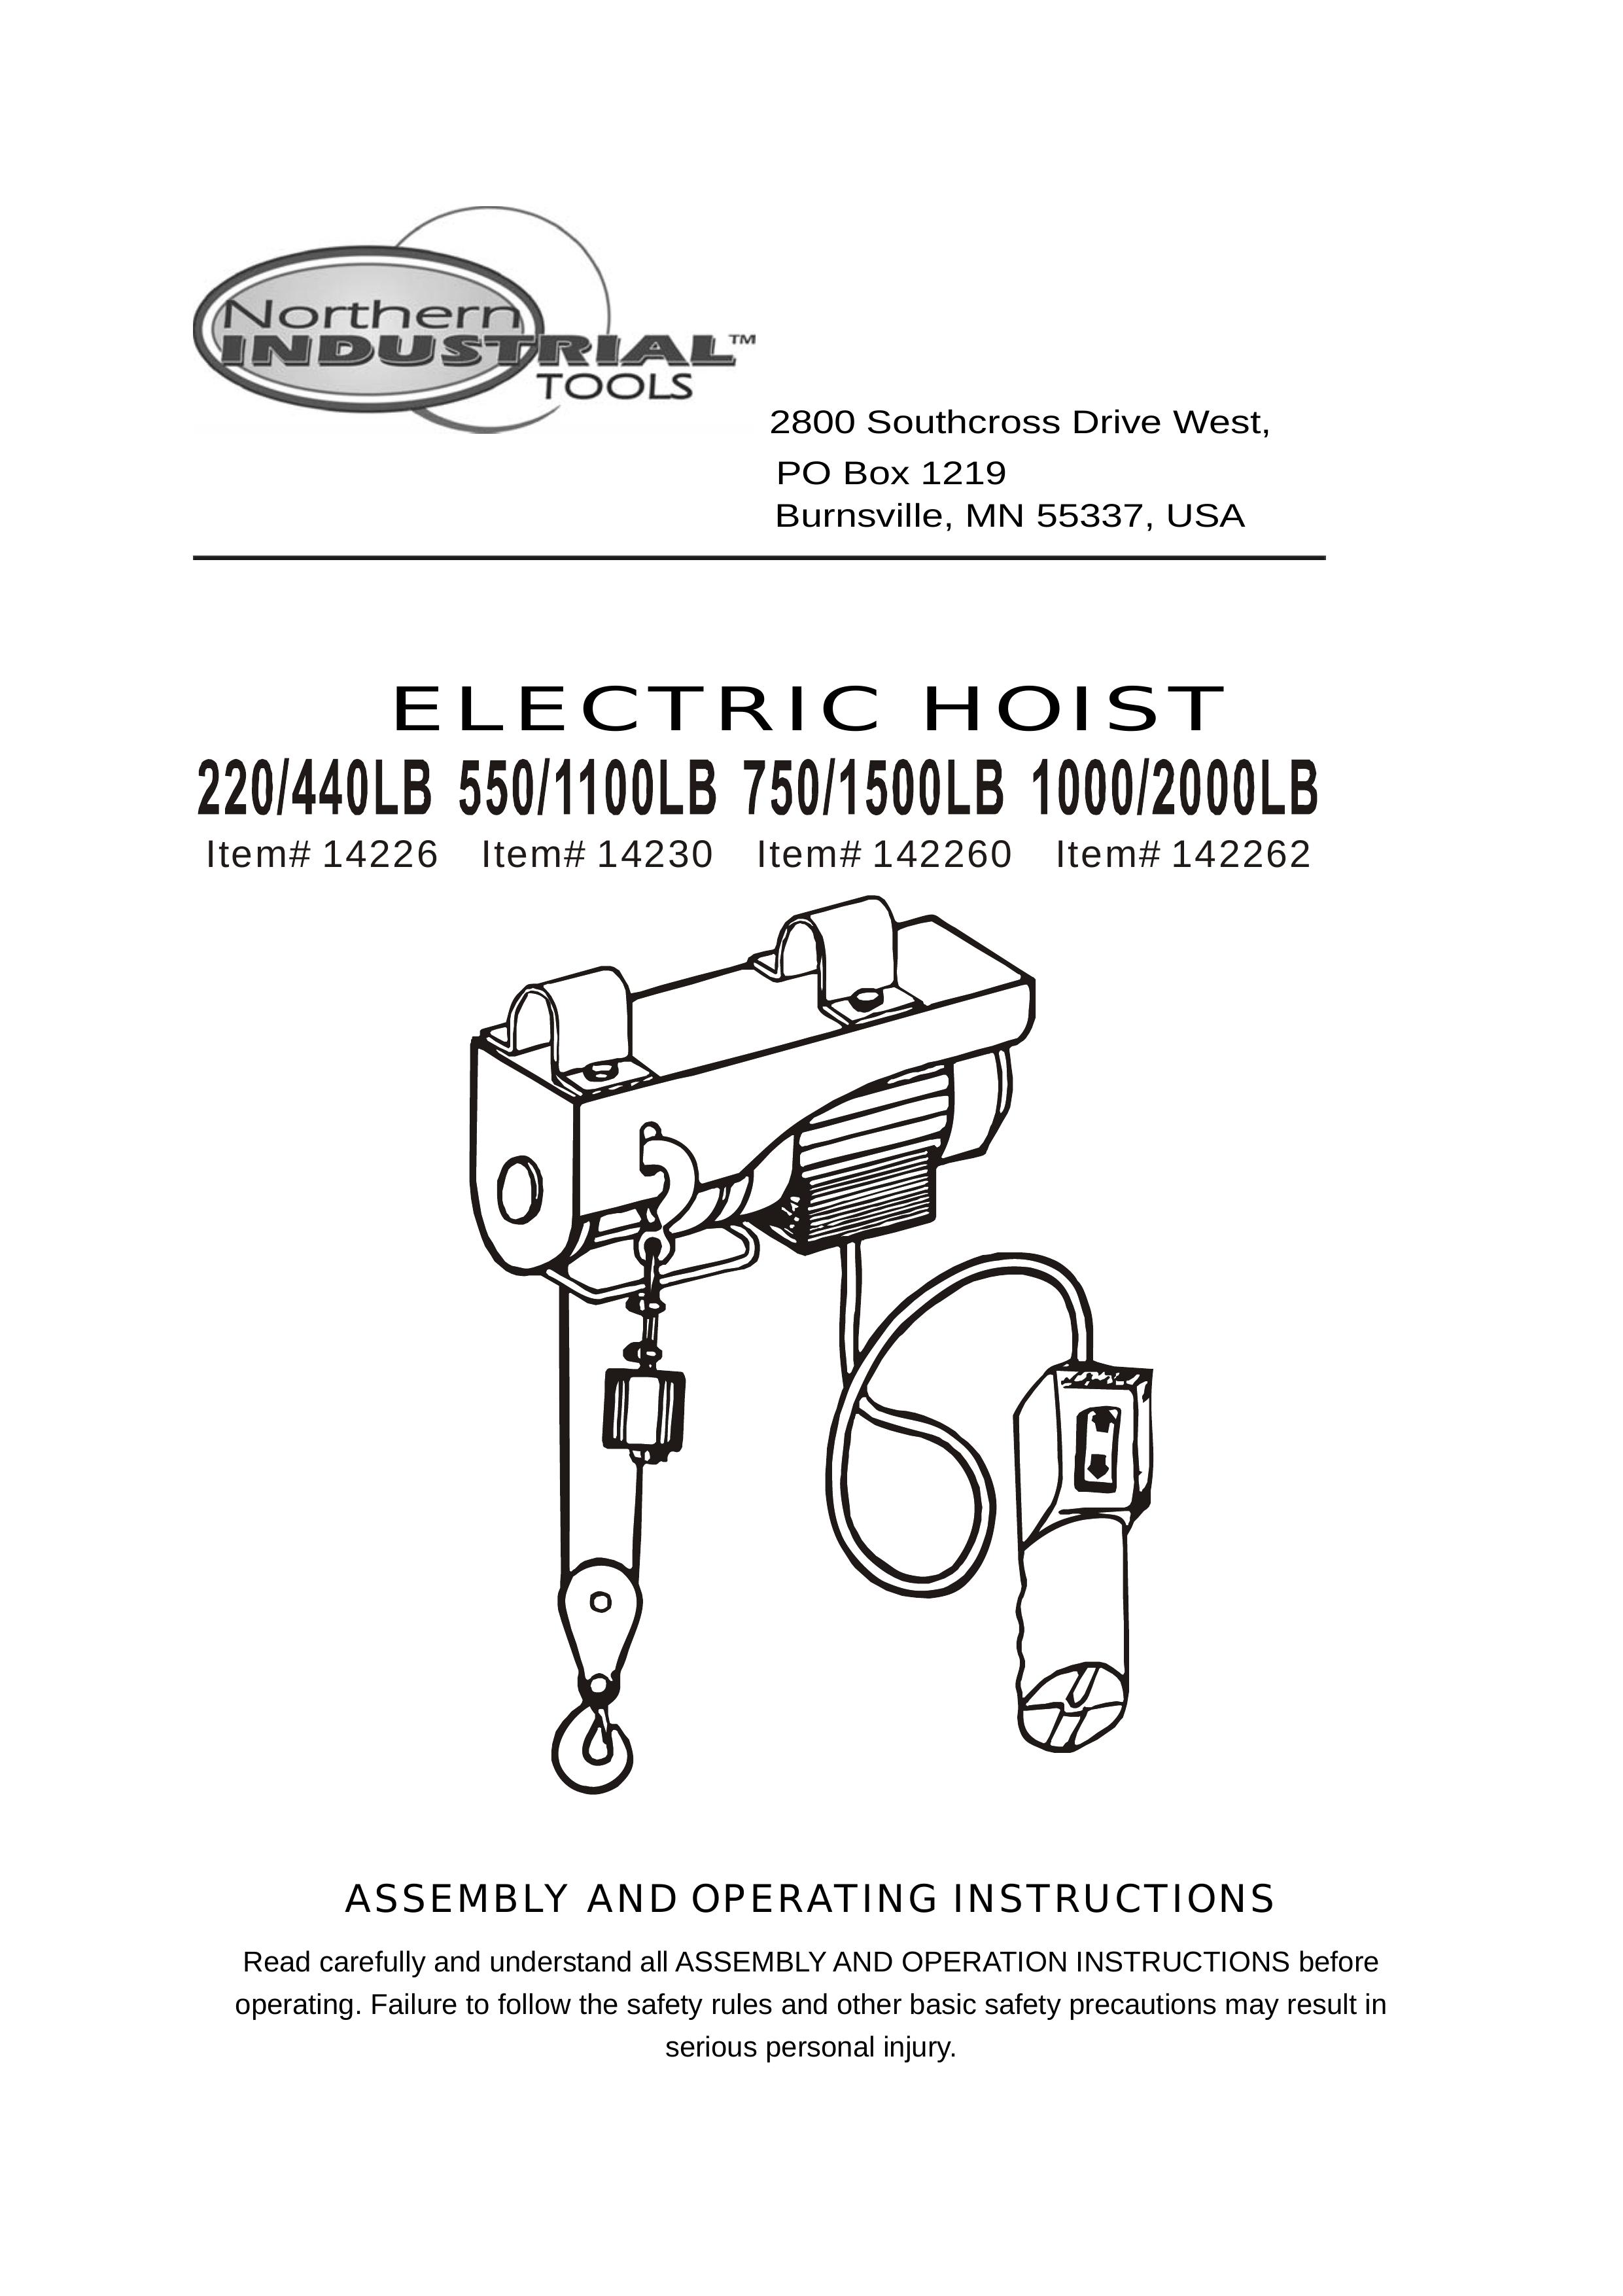 Northern Industrial Tools 142260 Personal Lift User Manual